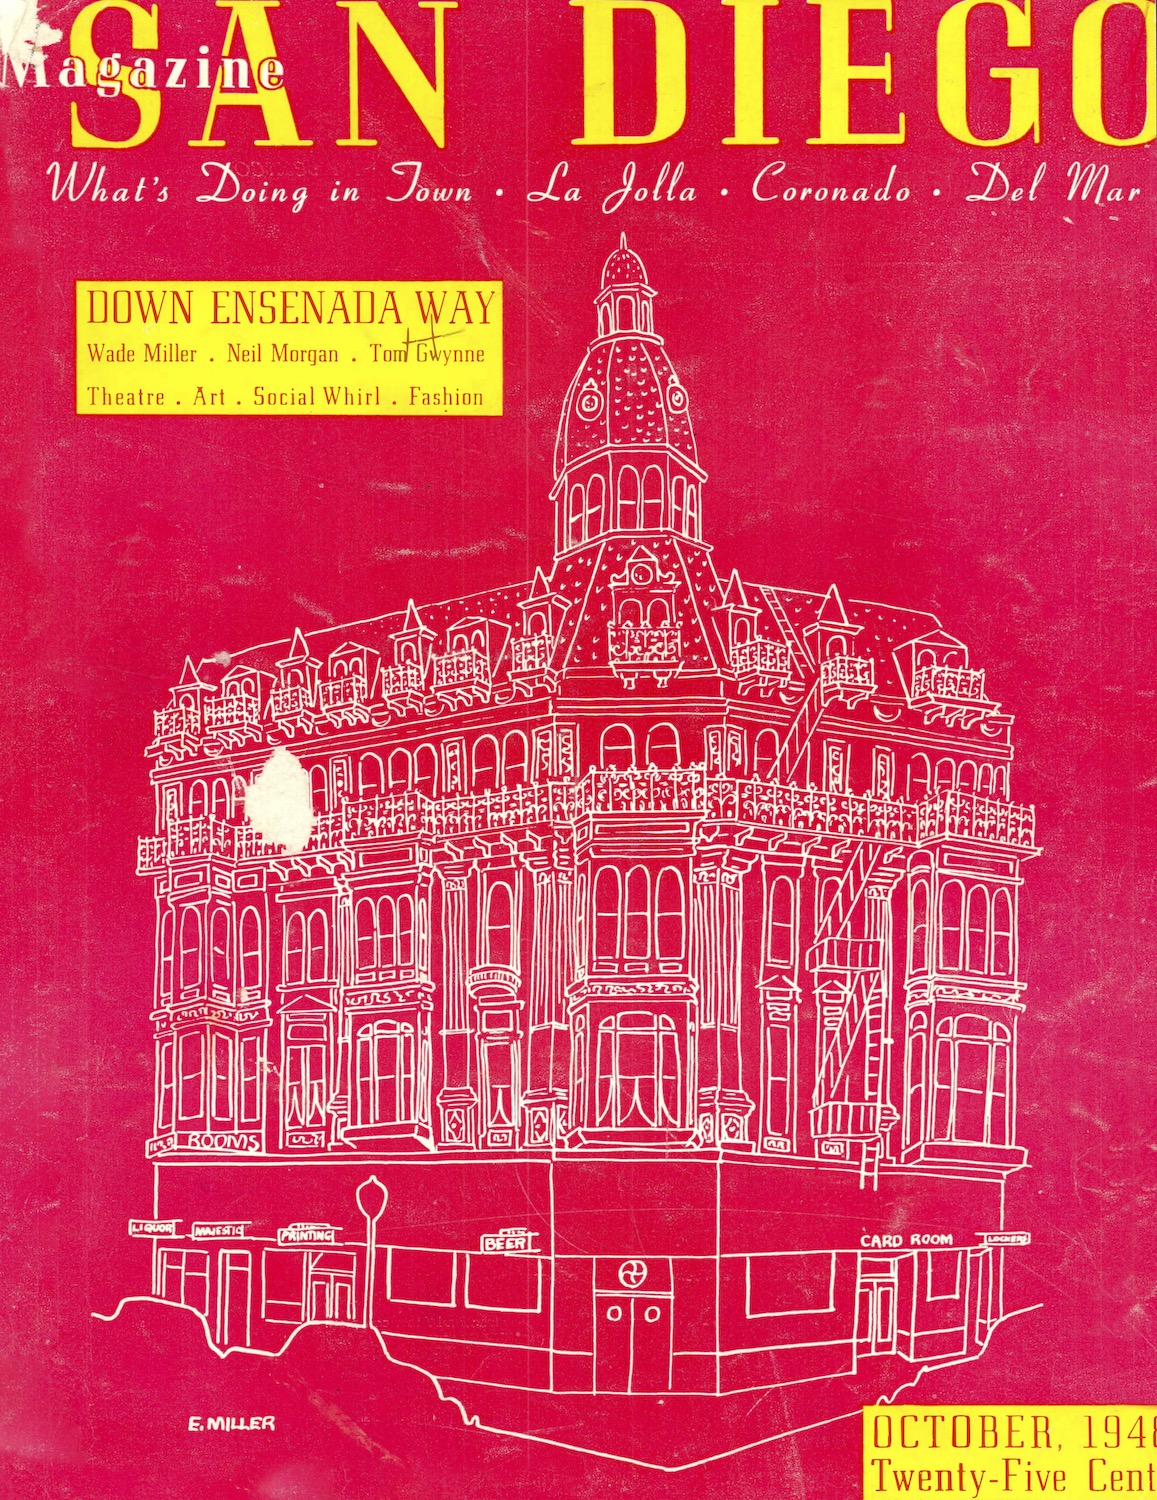 San Diego Magazine's First Cover from October 1949 Editor's Featuring an Illustration of a classic SD buidling on a red background